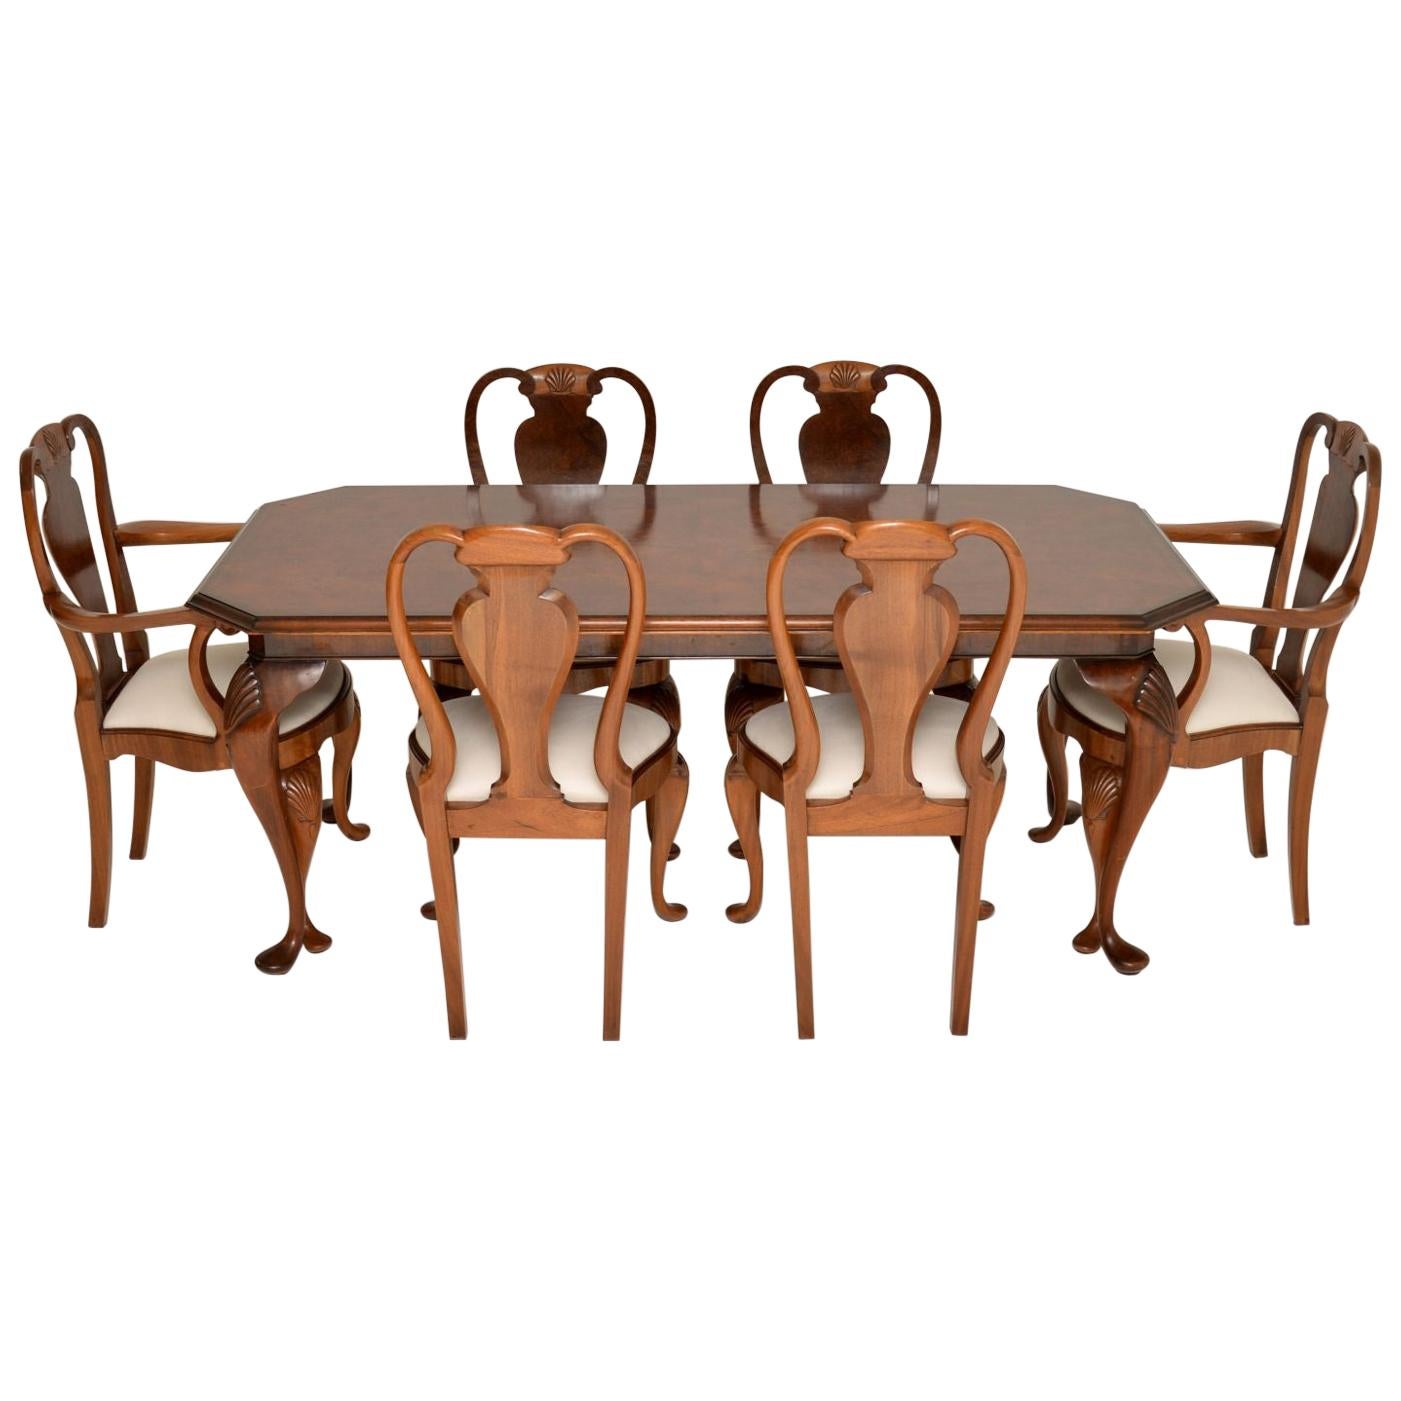 Antique Queen Anne Style Burr Walnut Dining Chairs & Table